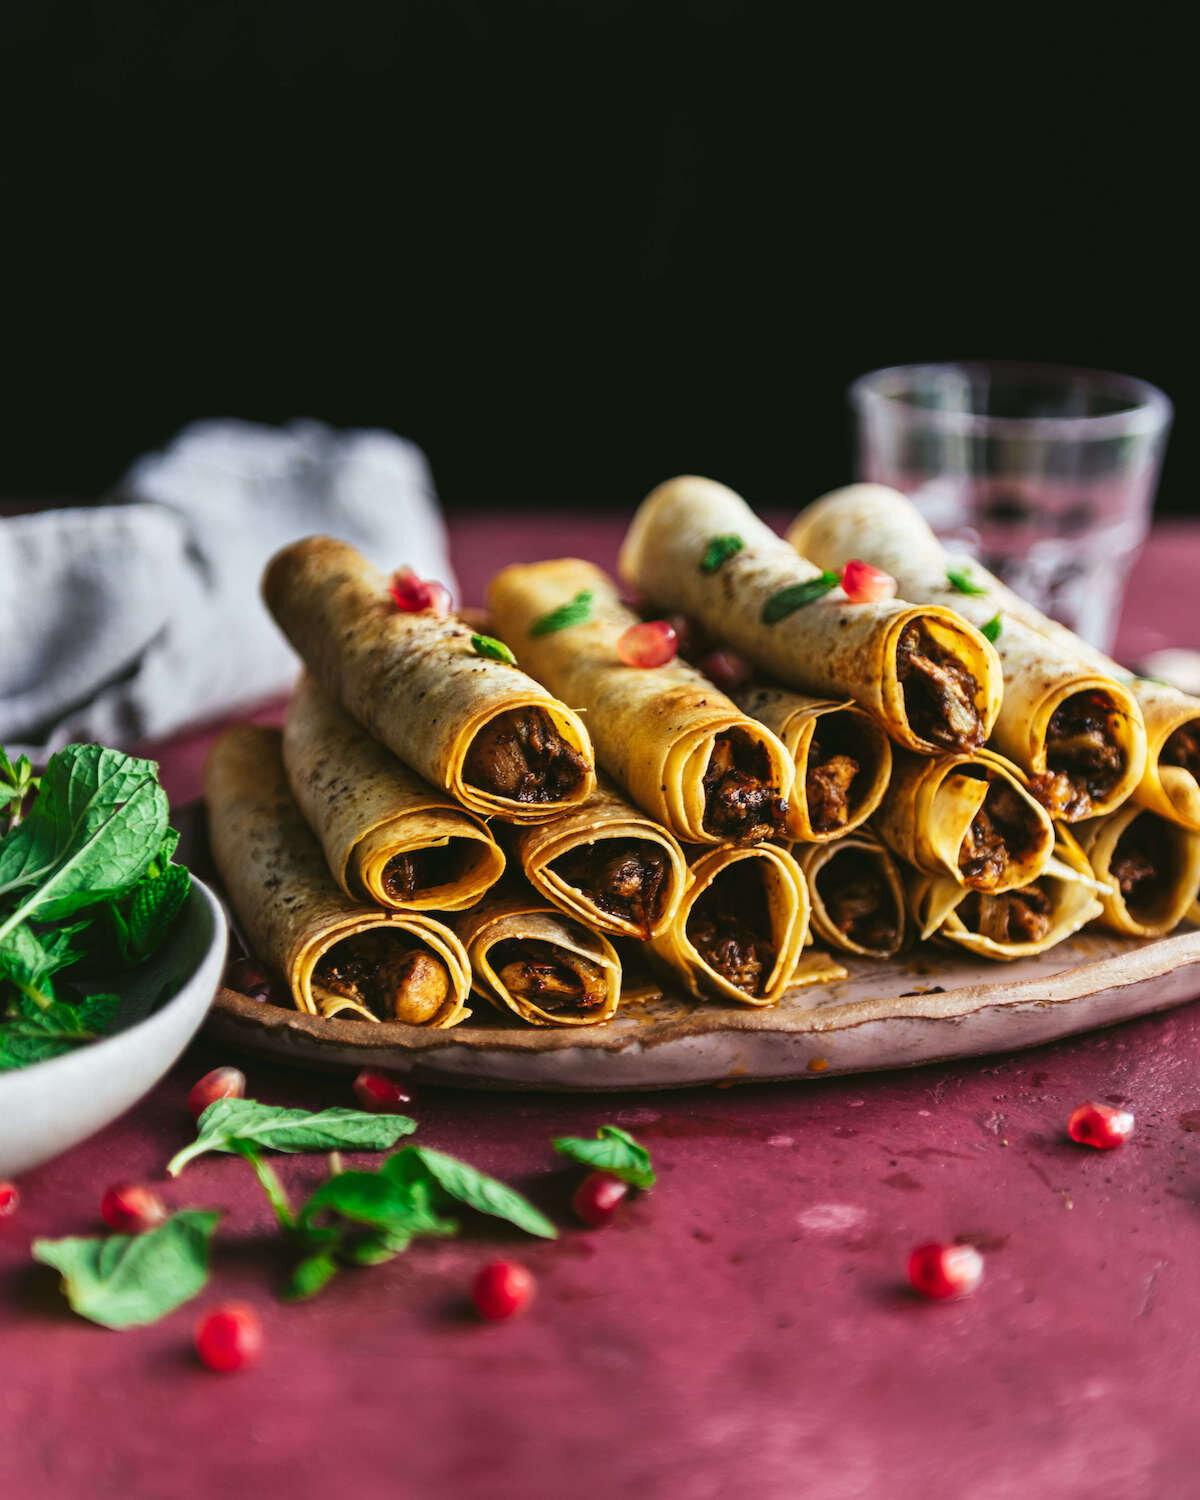 Omayah Atassi Dubai Food Photographer - Side-angle shot of musakhan (chicken sumac rolls) plated with a garnish of pomegranate and mint